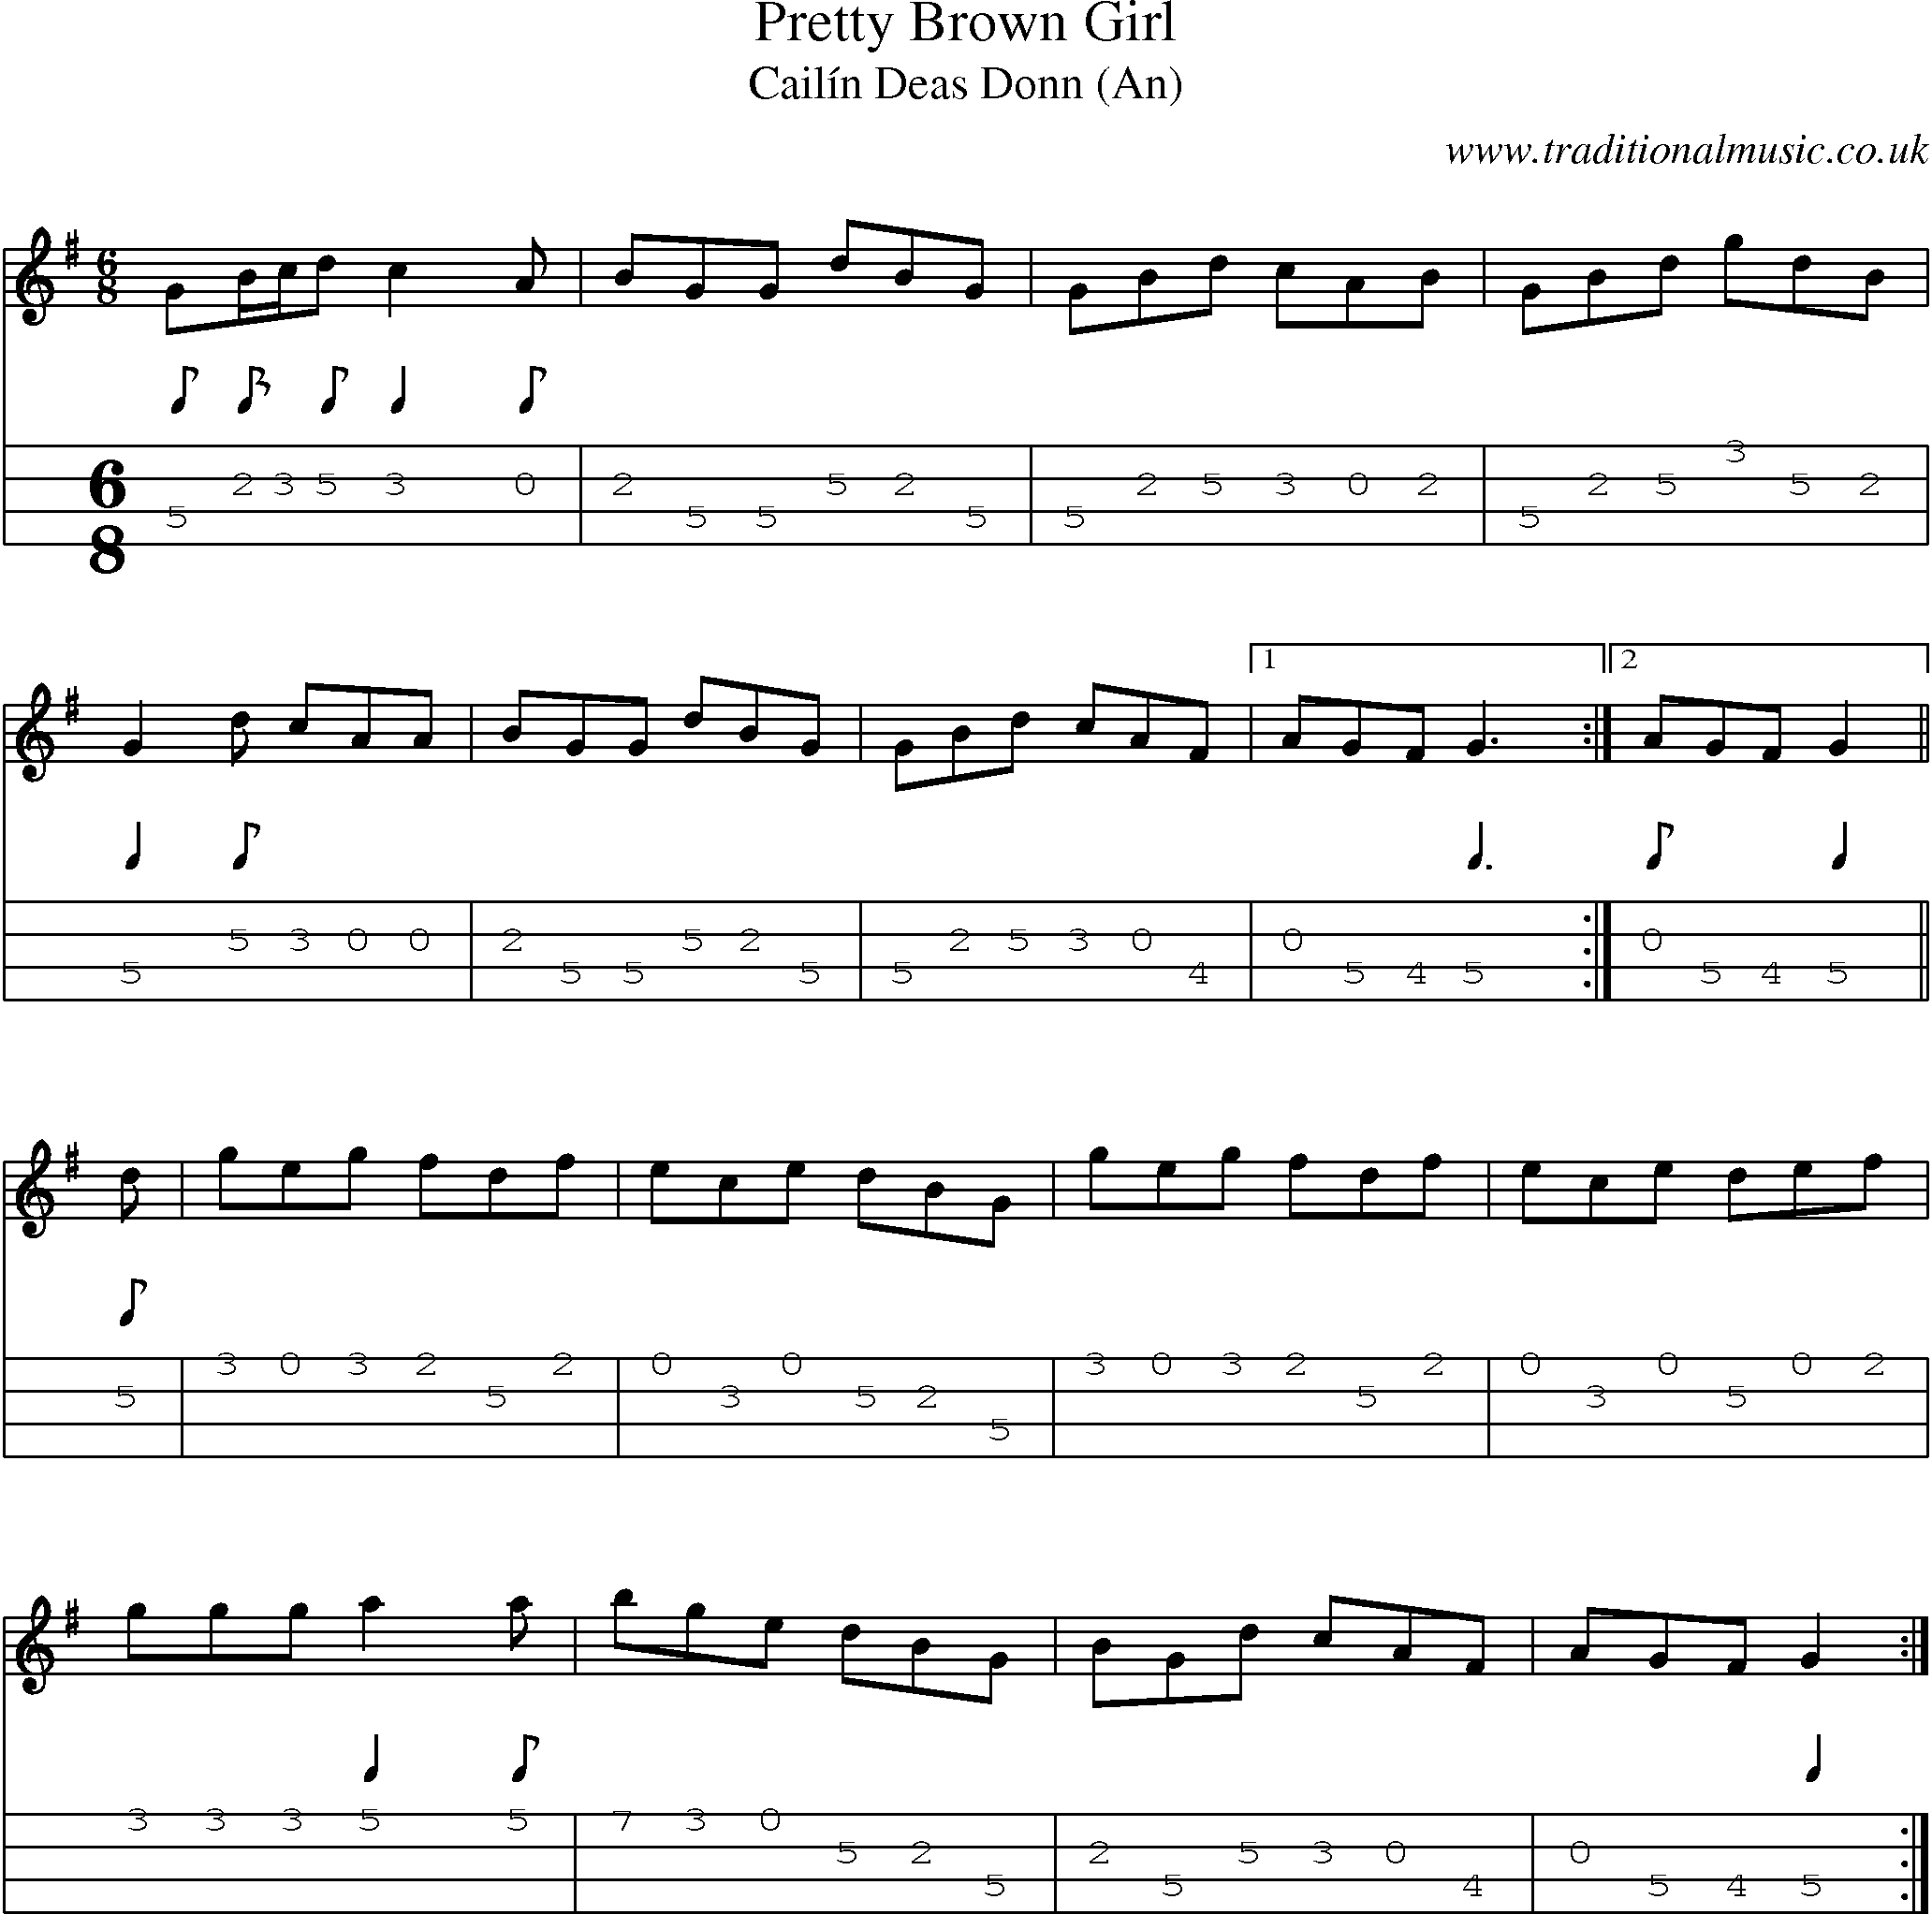 Music Score and Mandolin Tabs for Pretty Brown Girl